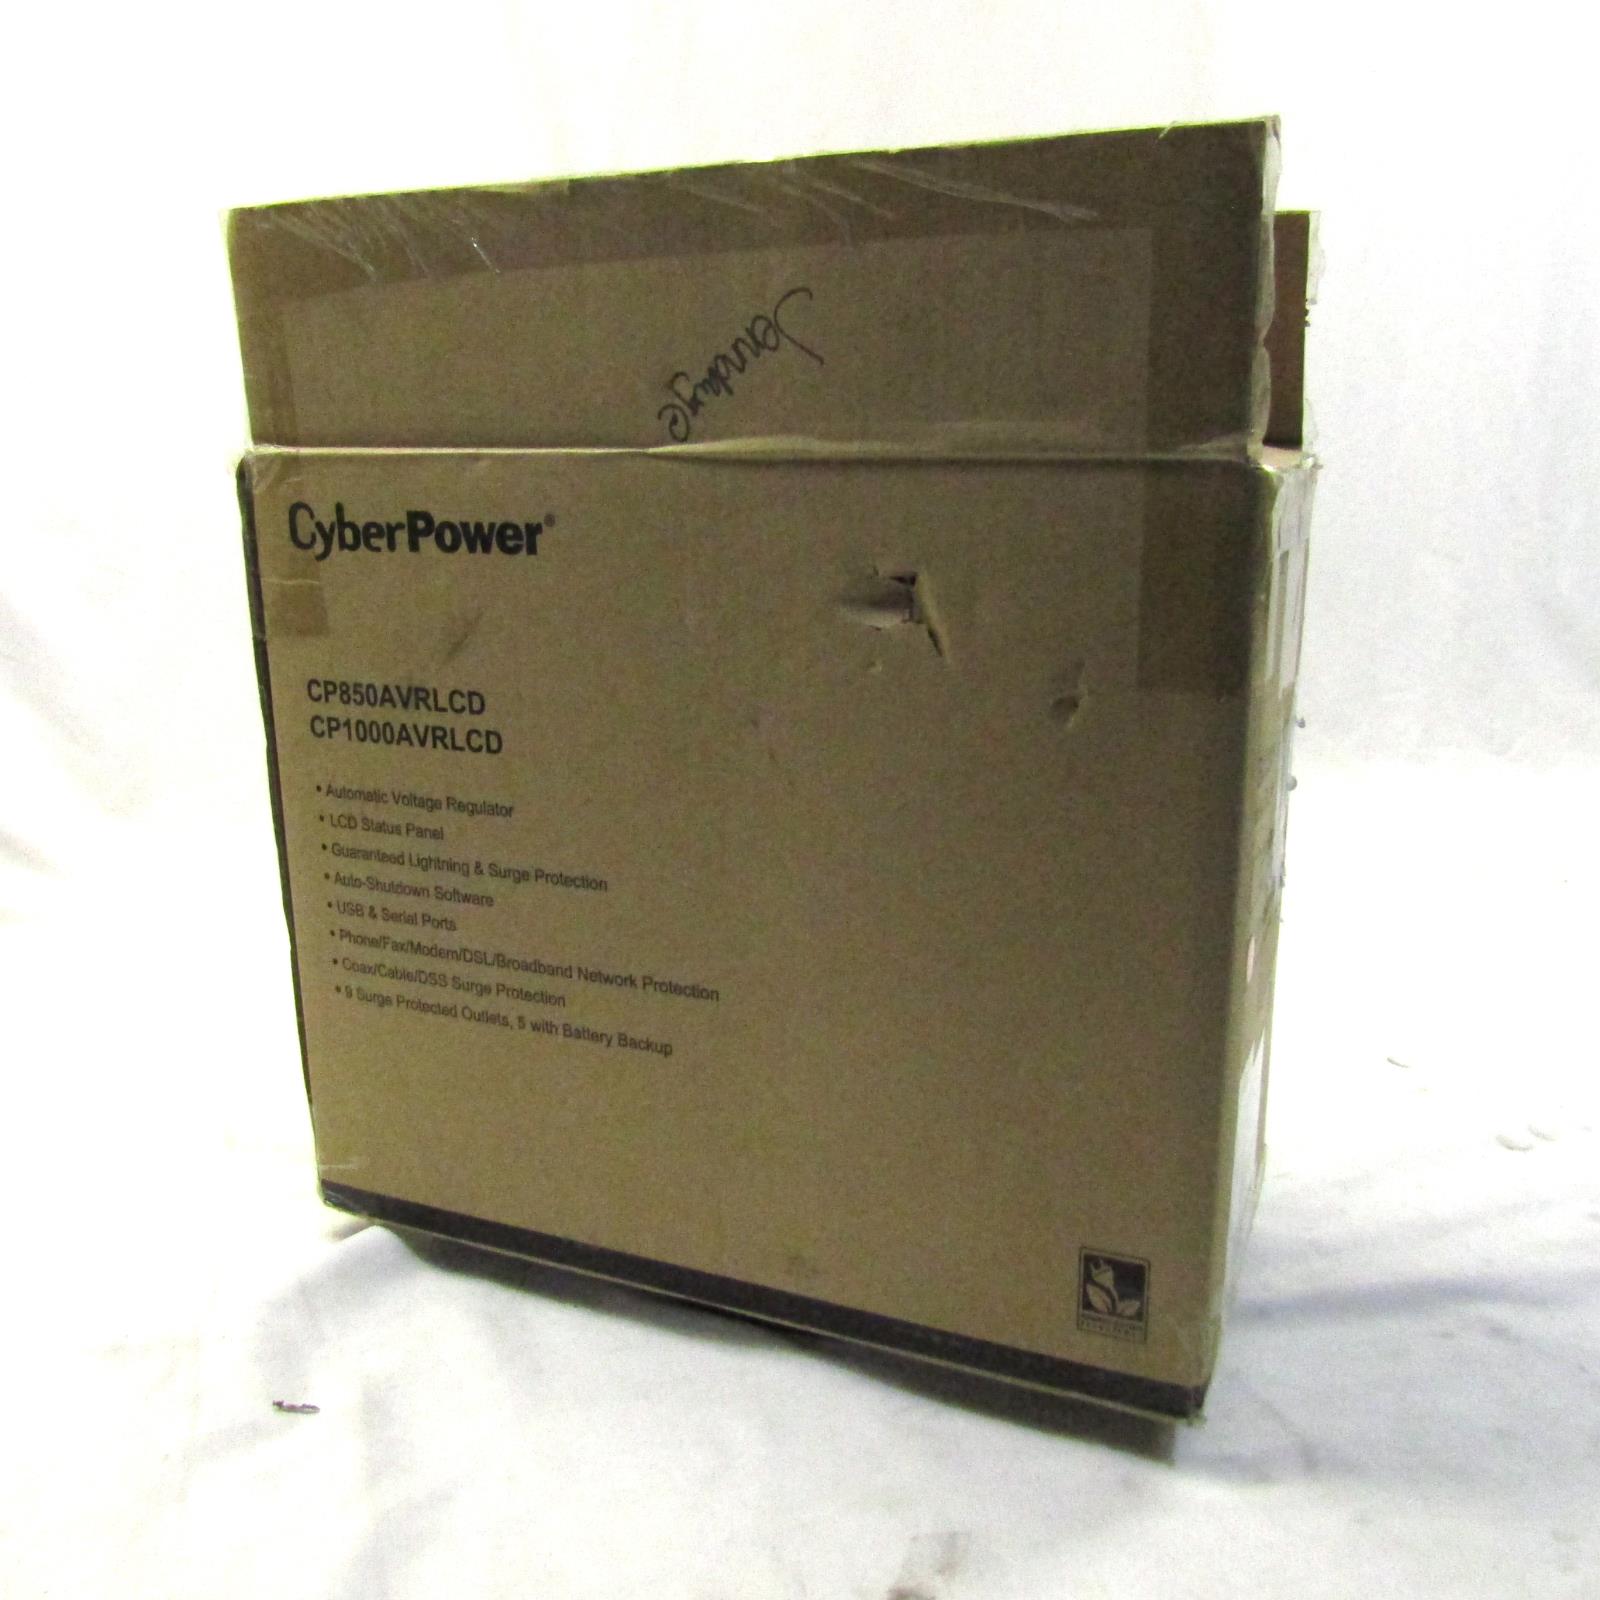 cyberpower battery backup with surge protection